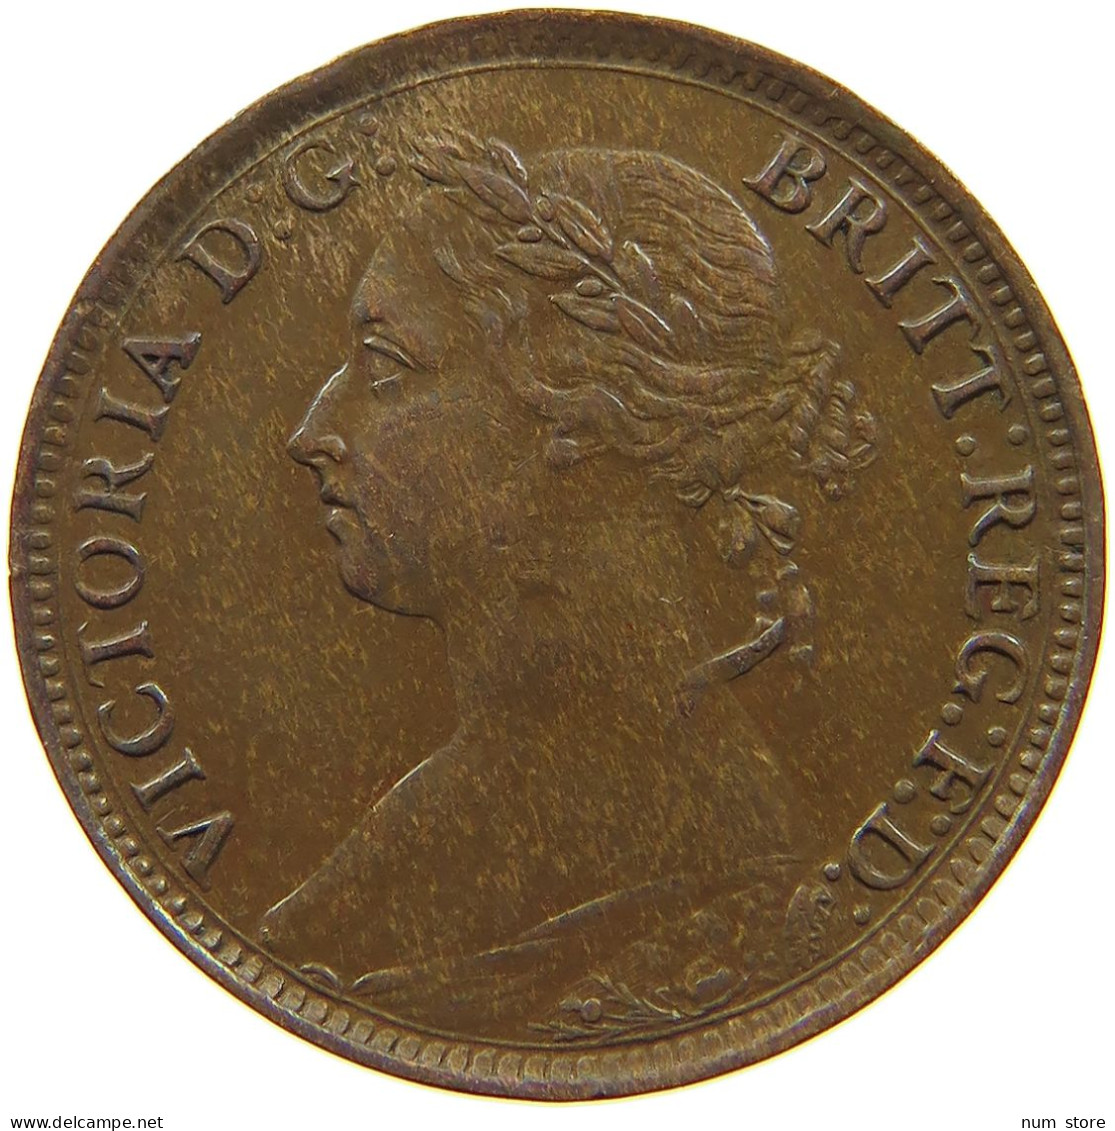 GREAT BRITAIN FARTHING 1884 Victoria 1837-1901 #a075 0553 - B. 1 Farthing